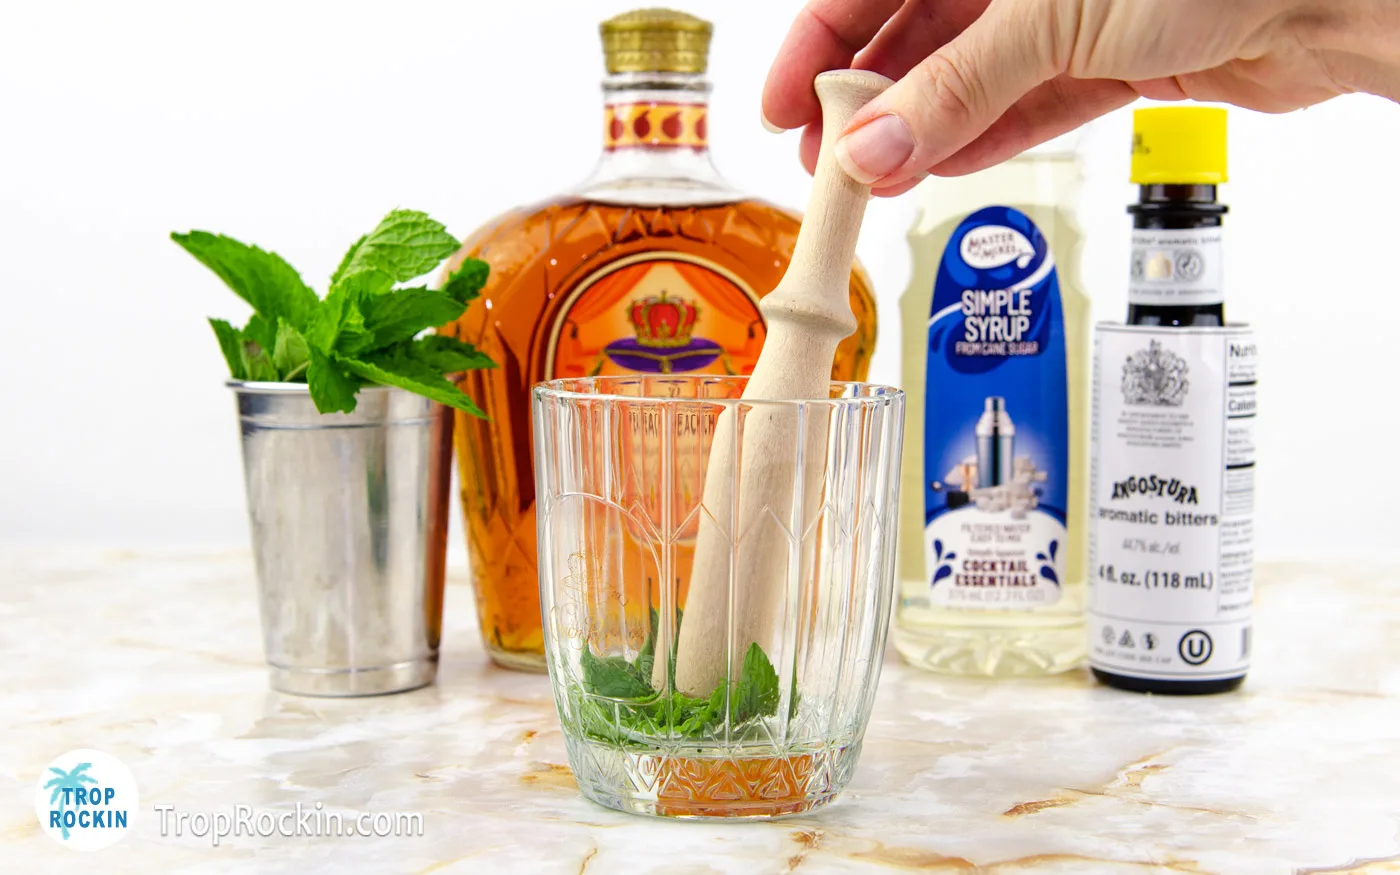 Using a muddler to muddle fresh mint leaves with the simple syrup in the cocktail glass.